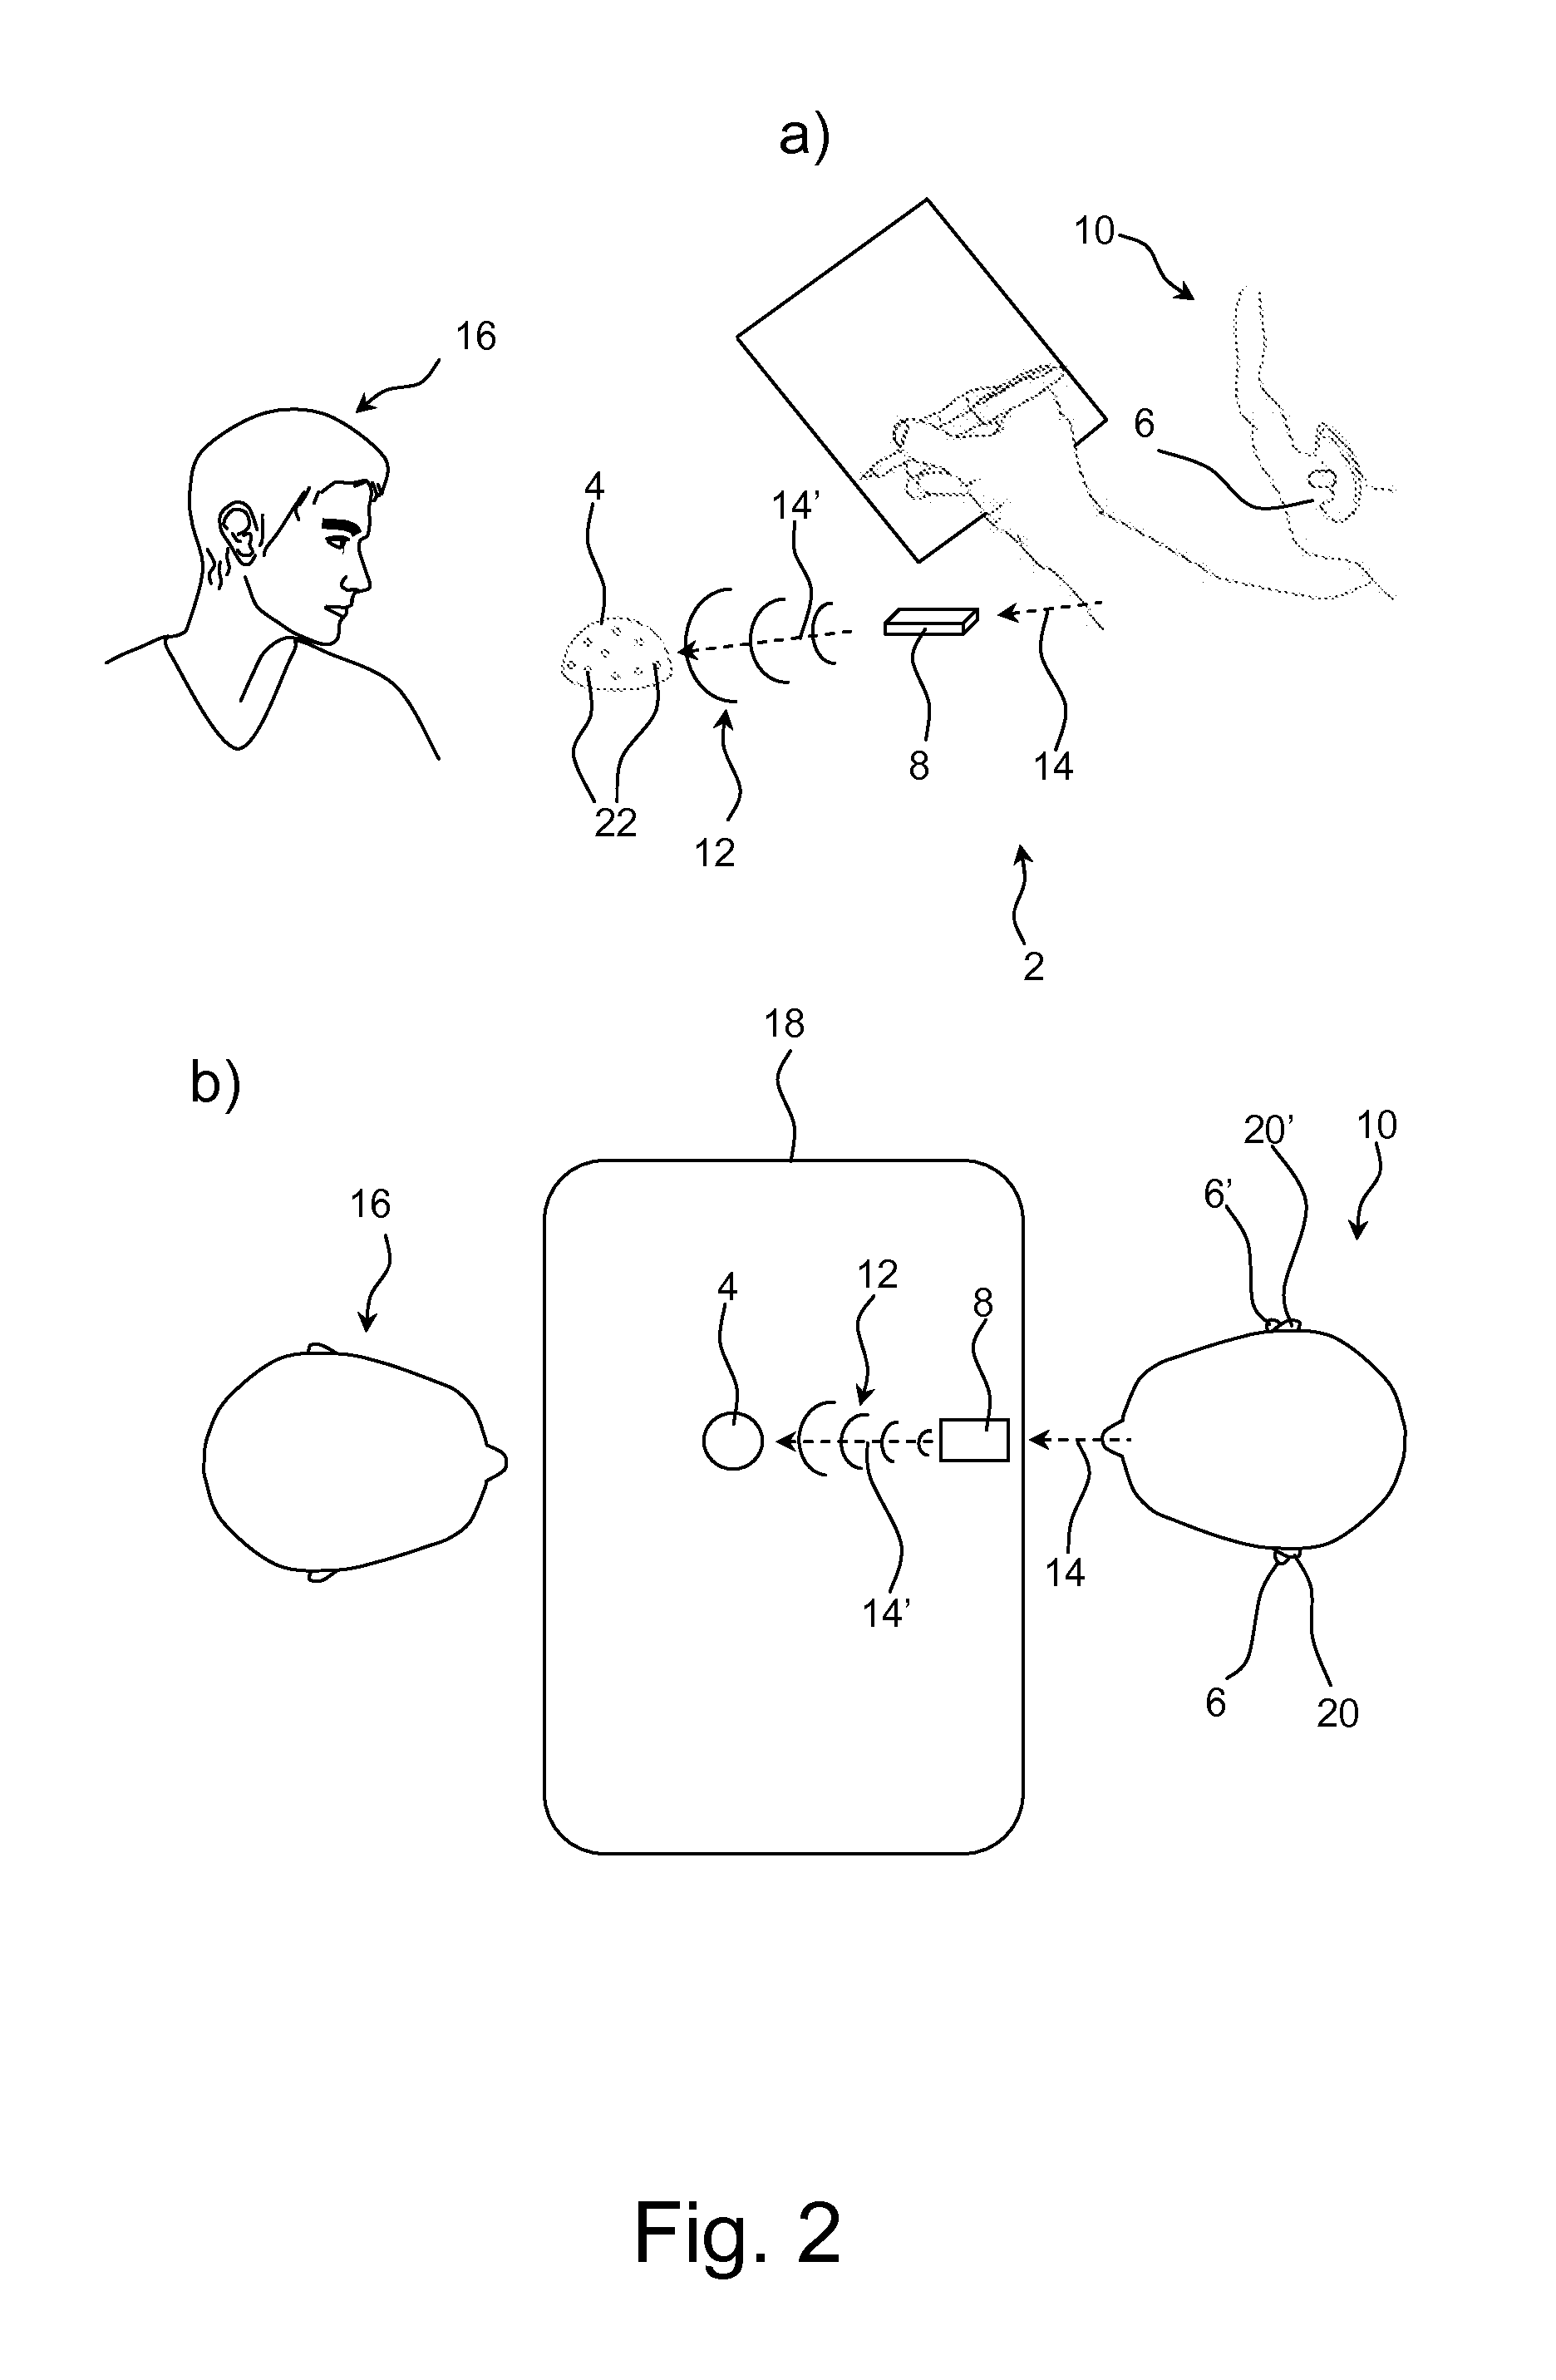 External microphone array and hearing aid using it